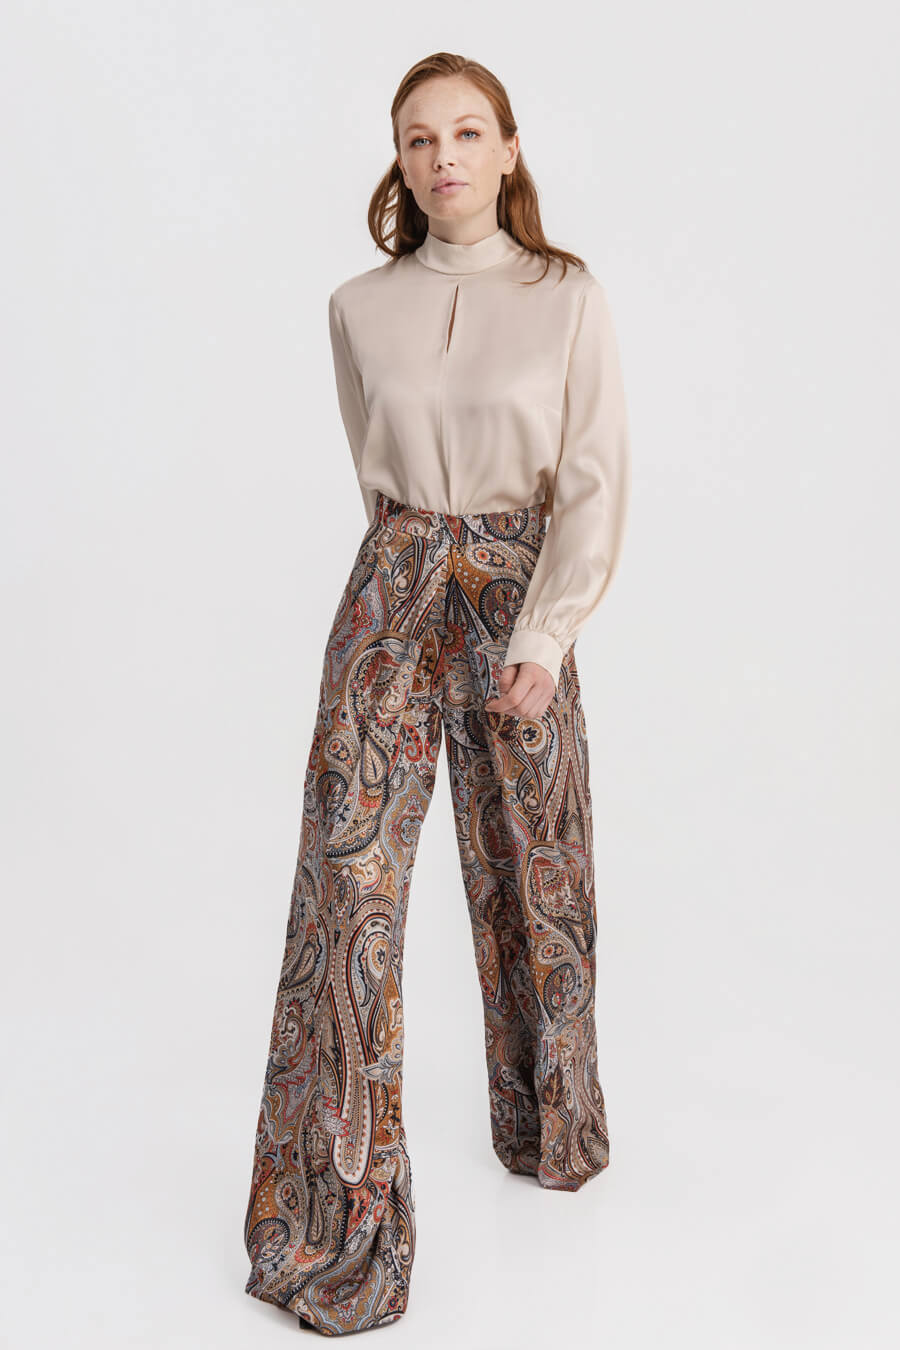 High-waist pants with wide leg and front slits in paisley